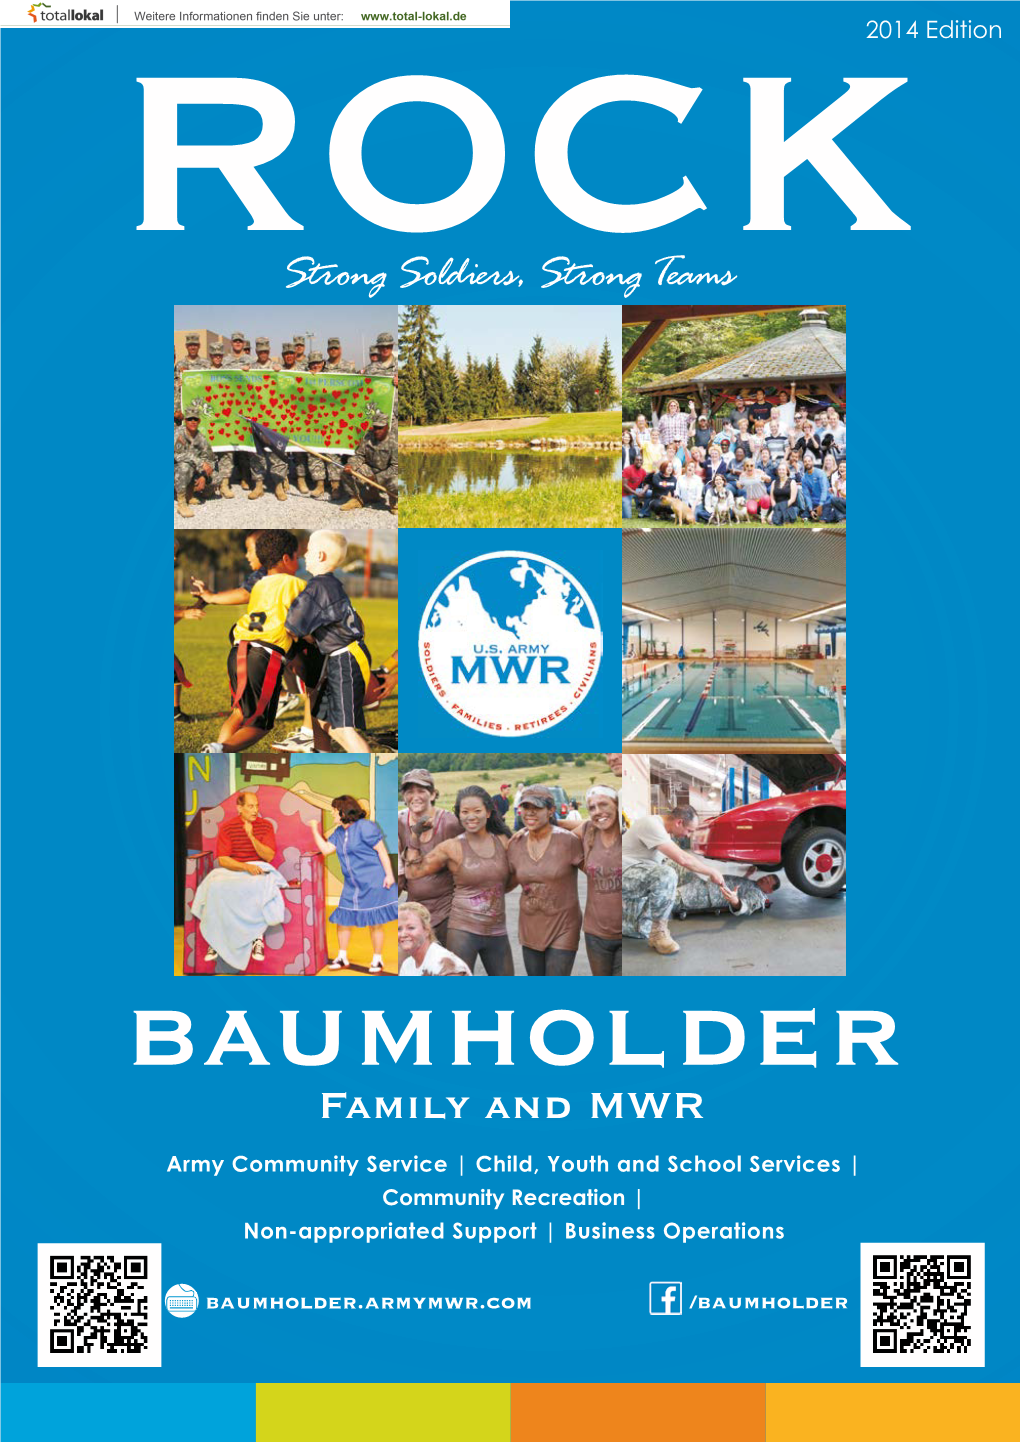 Family and MWR Baumholder